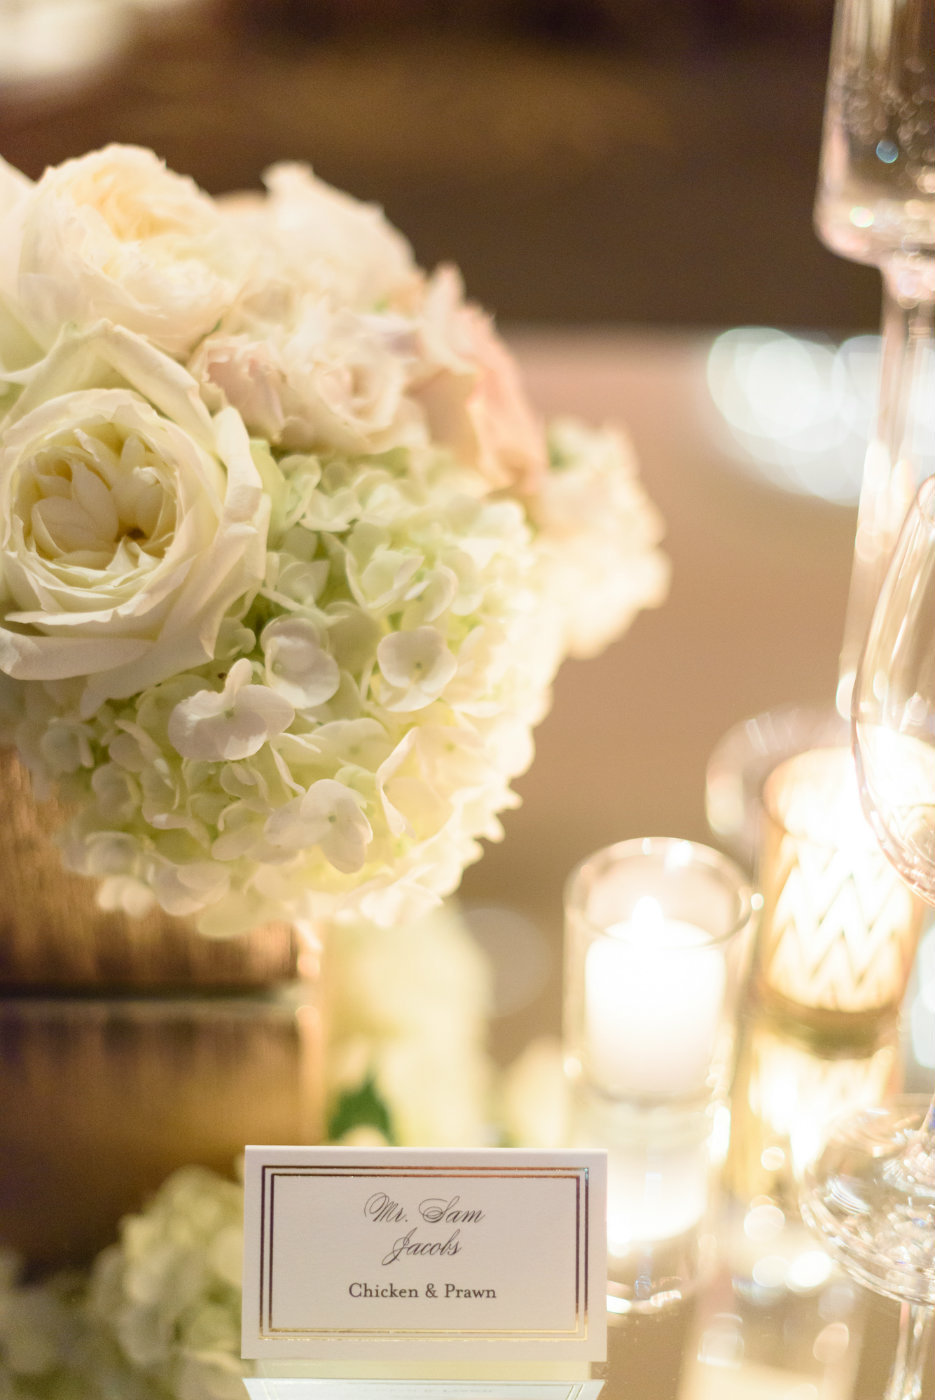 White hydrangea and polo roses softly lit by candles wedding designed by Flora Nova.